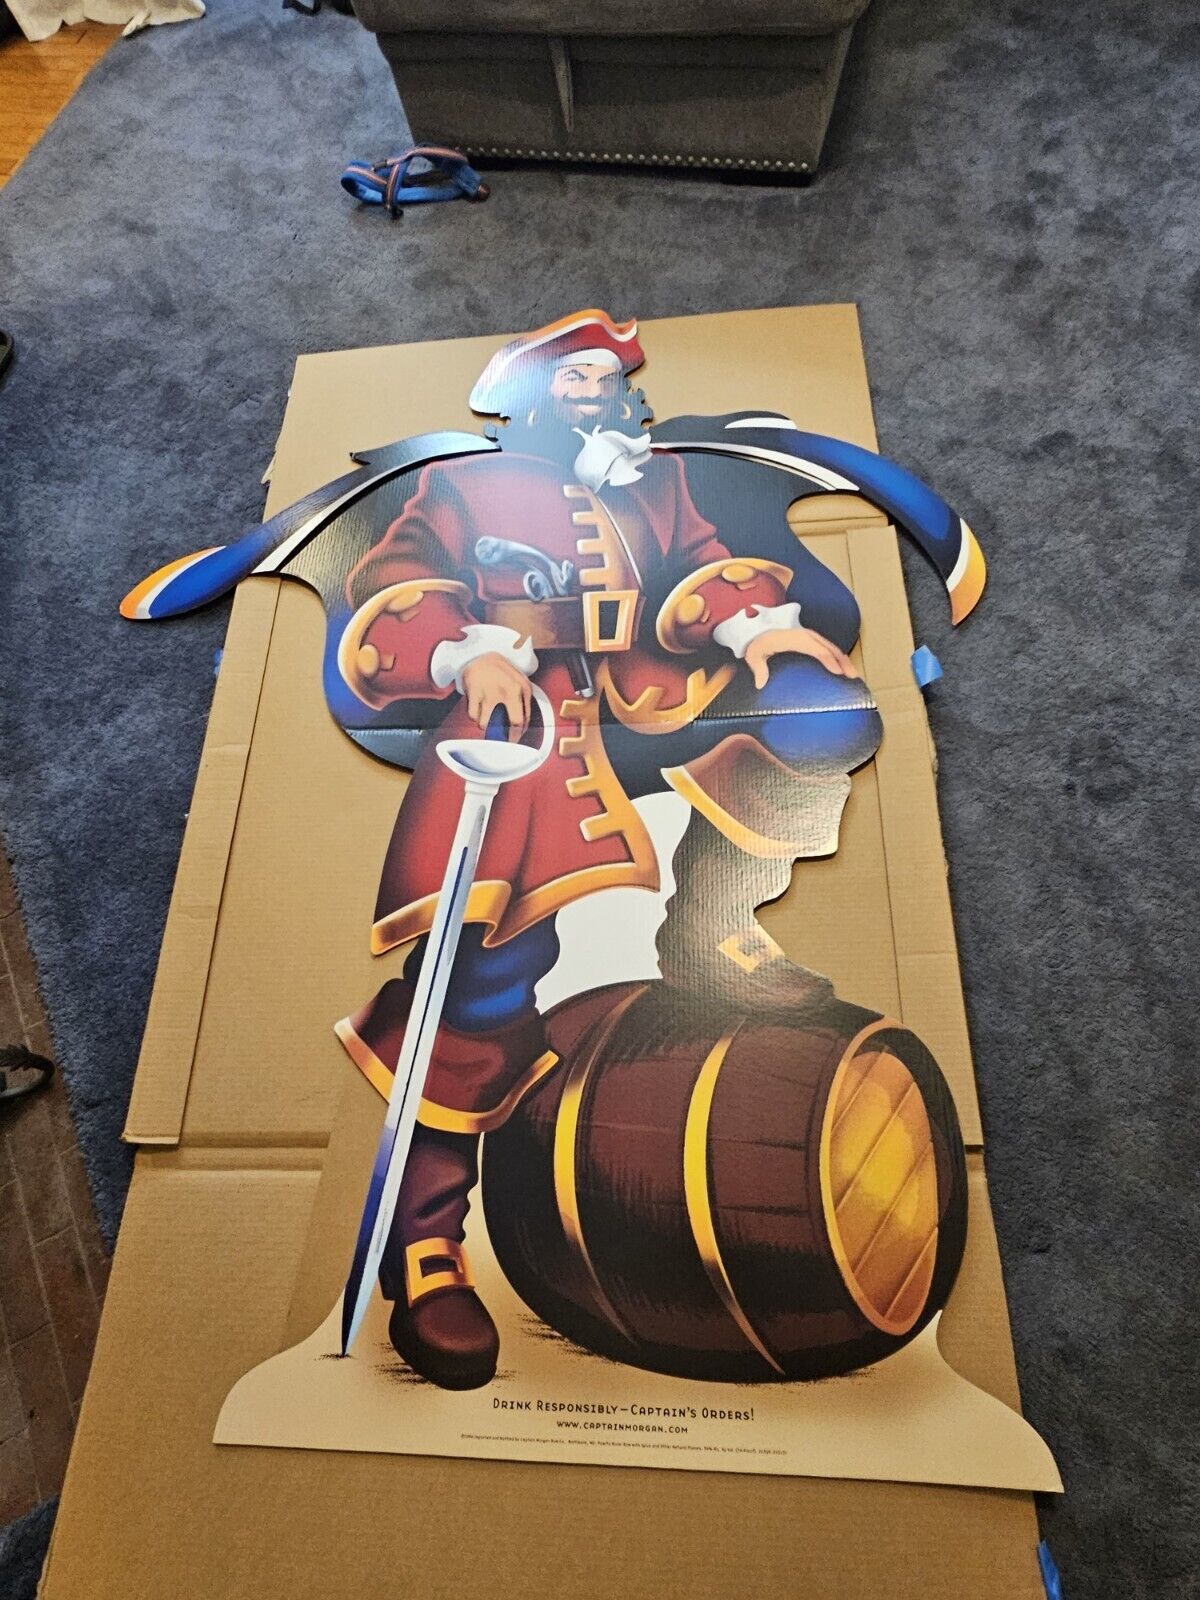 Captain Morgan Spiced Rum Promotional Standee Rare NICE MANCAVE 6ft Wow